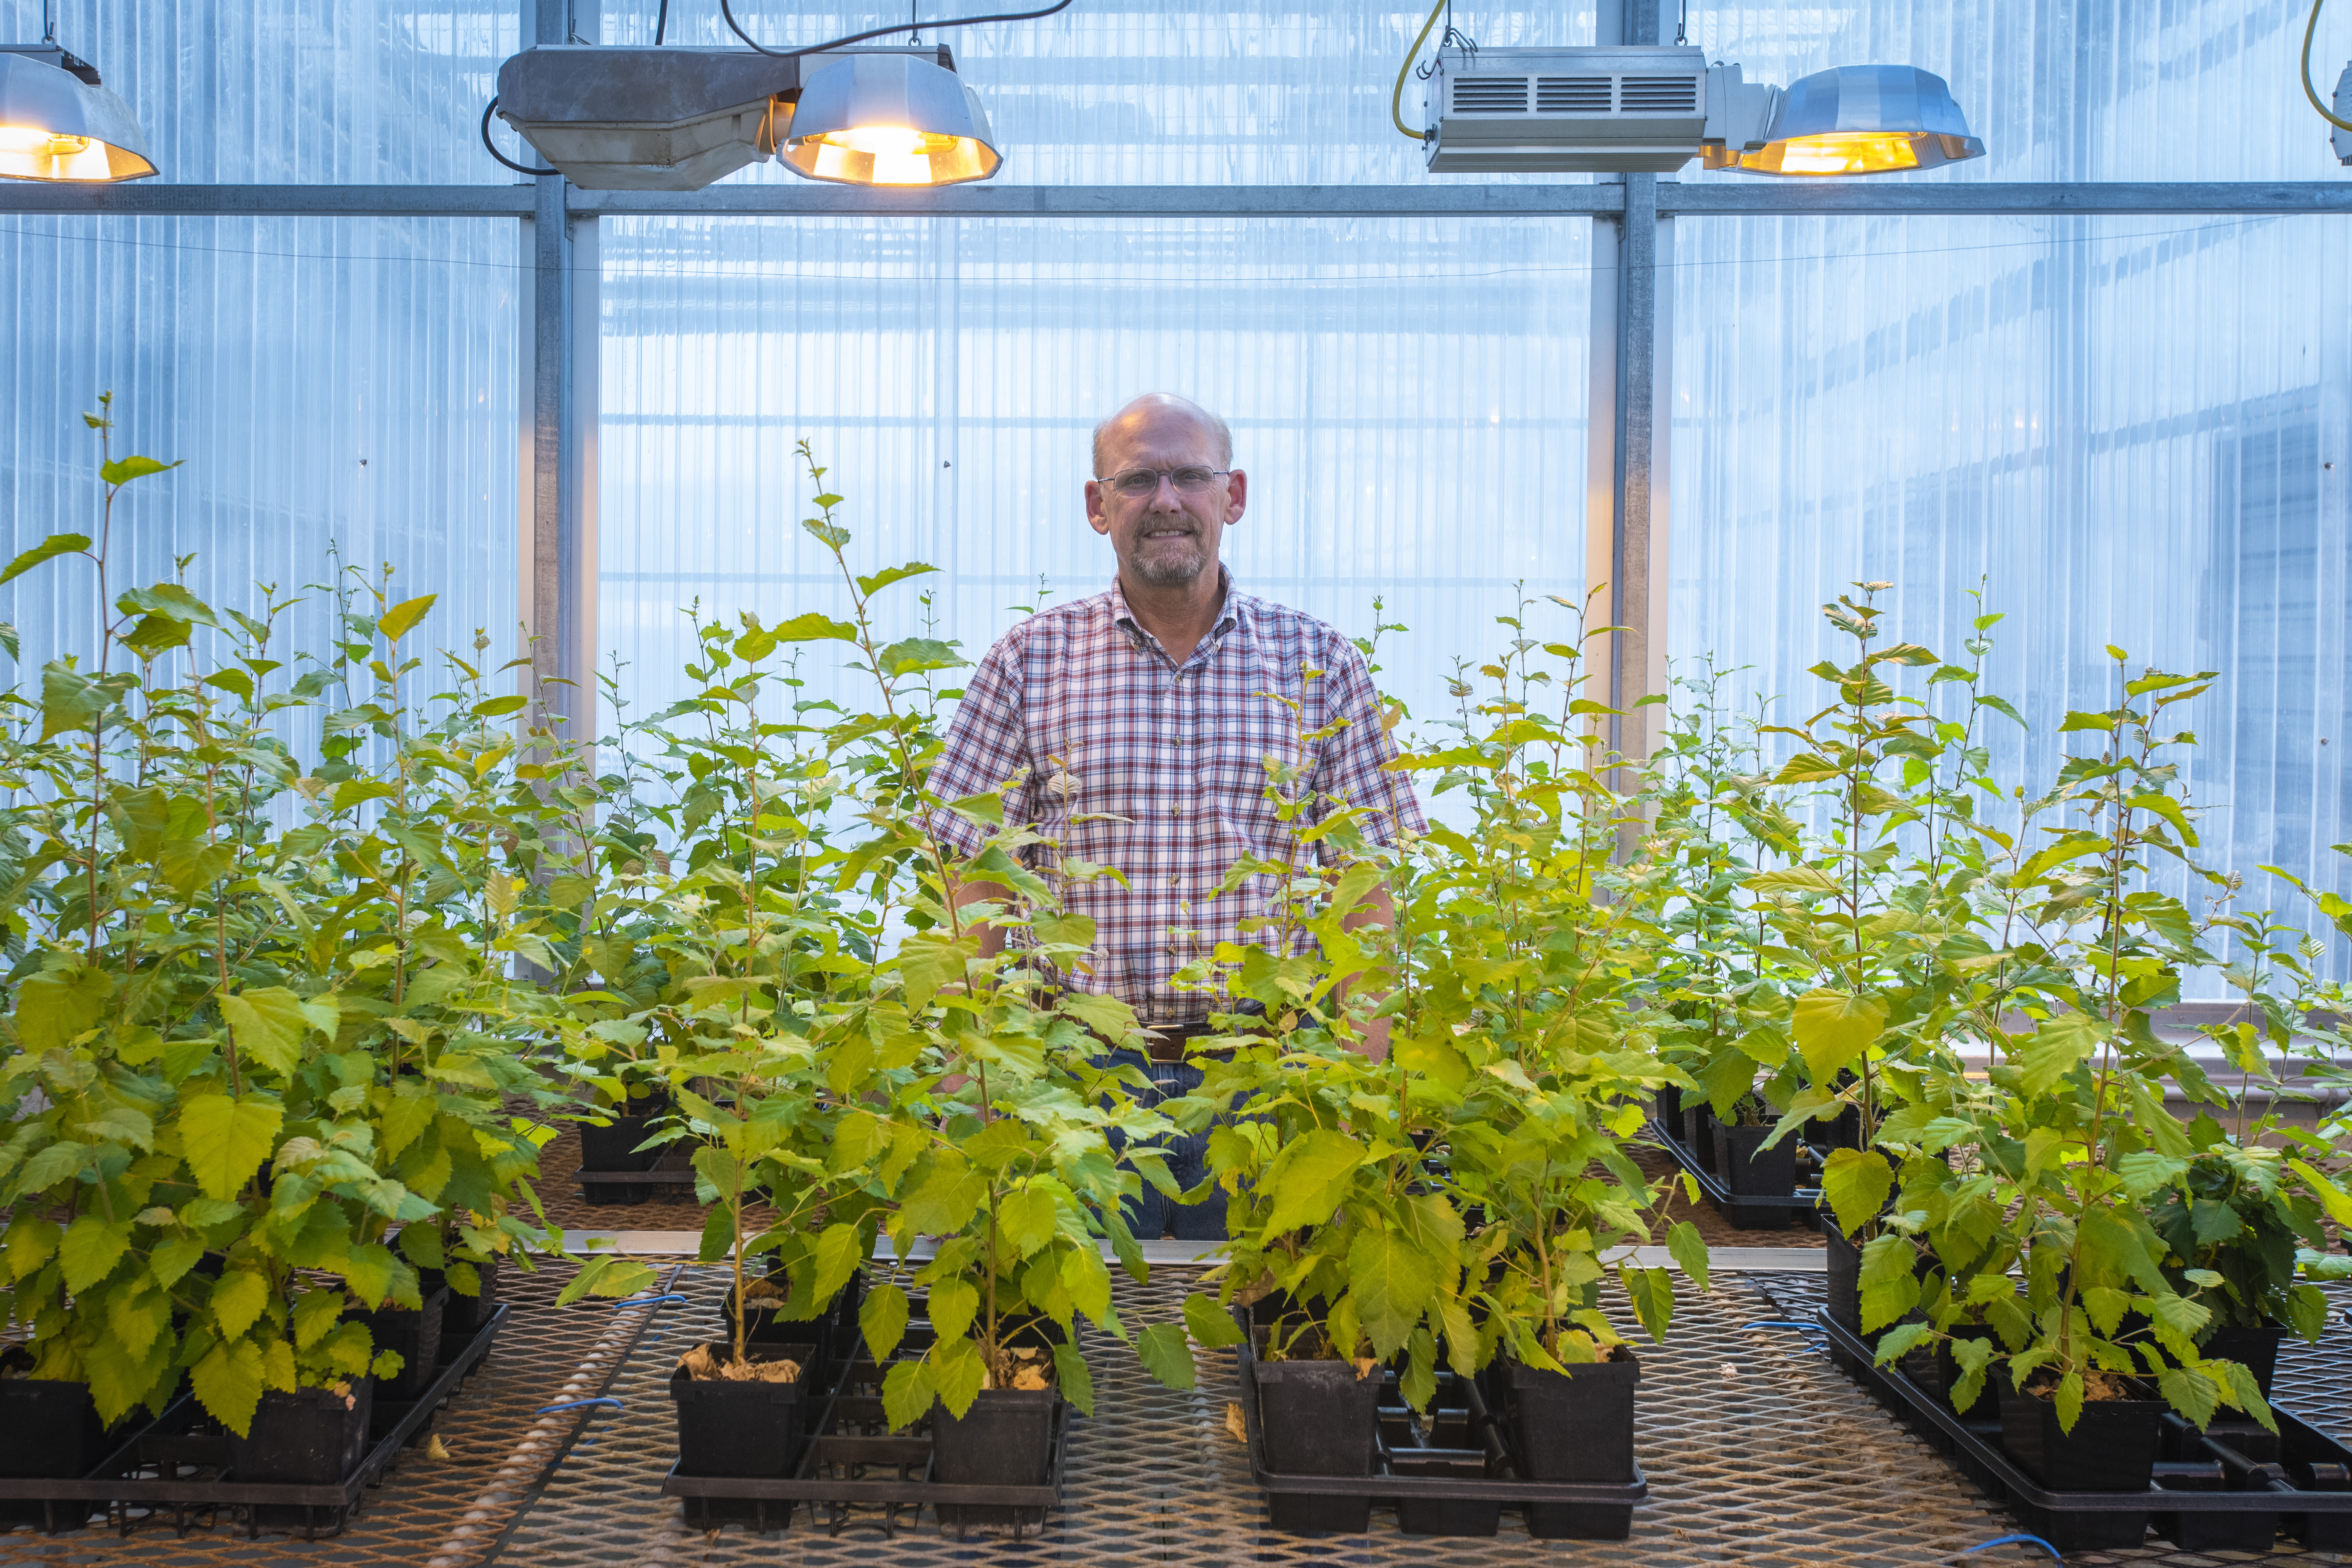 UConn’s beloved 'swing tree' beside Mirror Lake, now reaching the twilight of its natural life, will live on through dozens of healthy seedlings that are being nurtured by horticulture professor Mark Brand at the Floriculture Greenhouse. (Sean Flynn/UConn Photo)